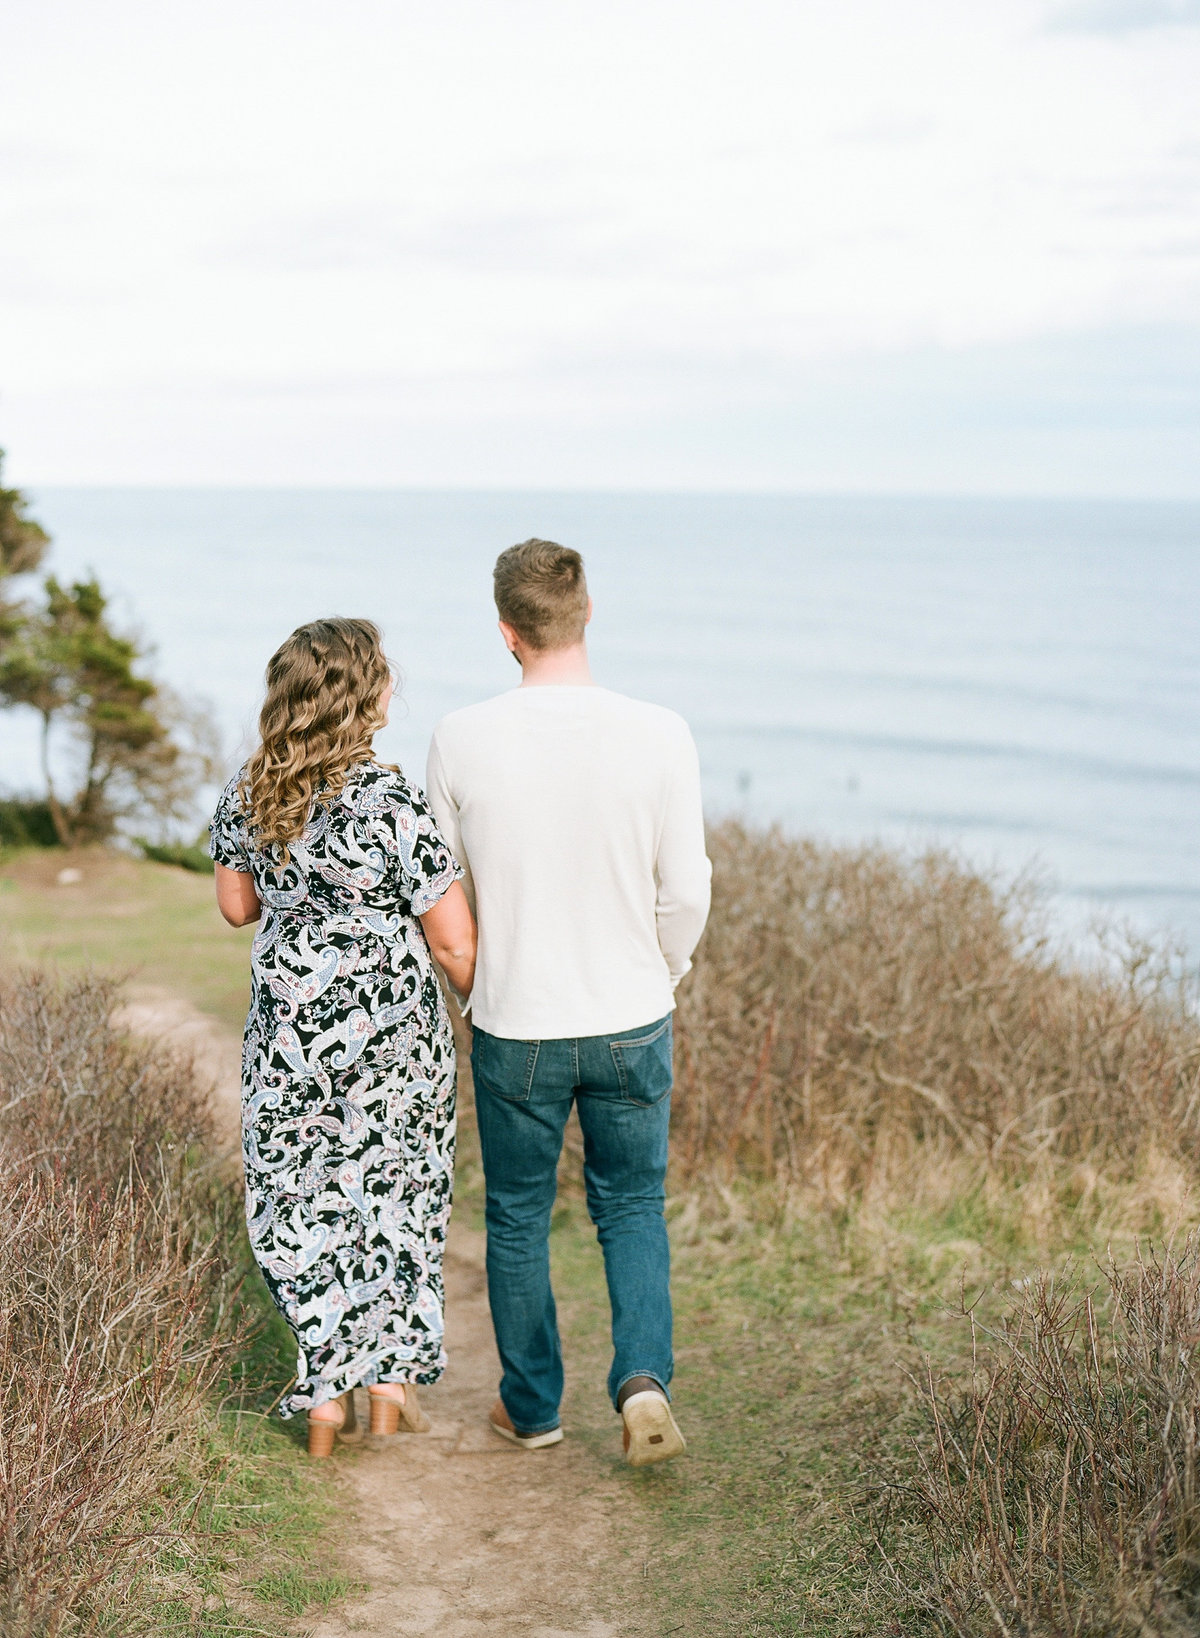 Jacqueline Anne Photography - Akayla and Andrew - Lawrencetown Beach-57